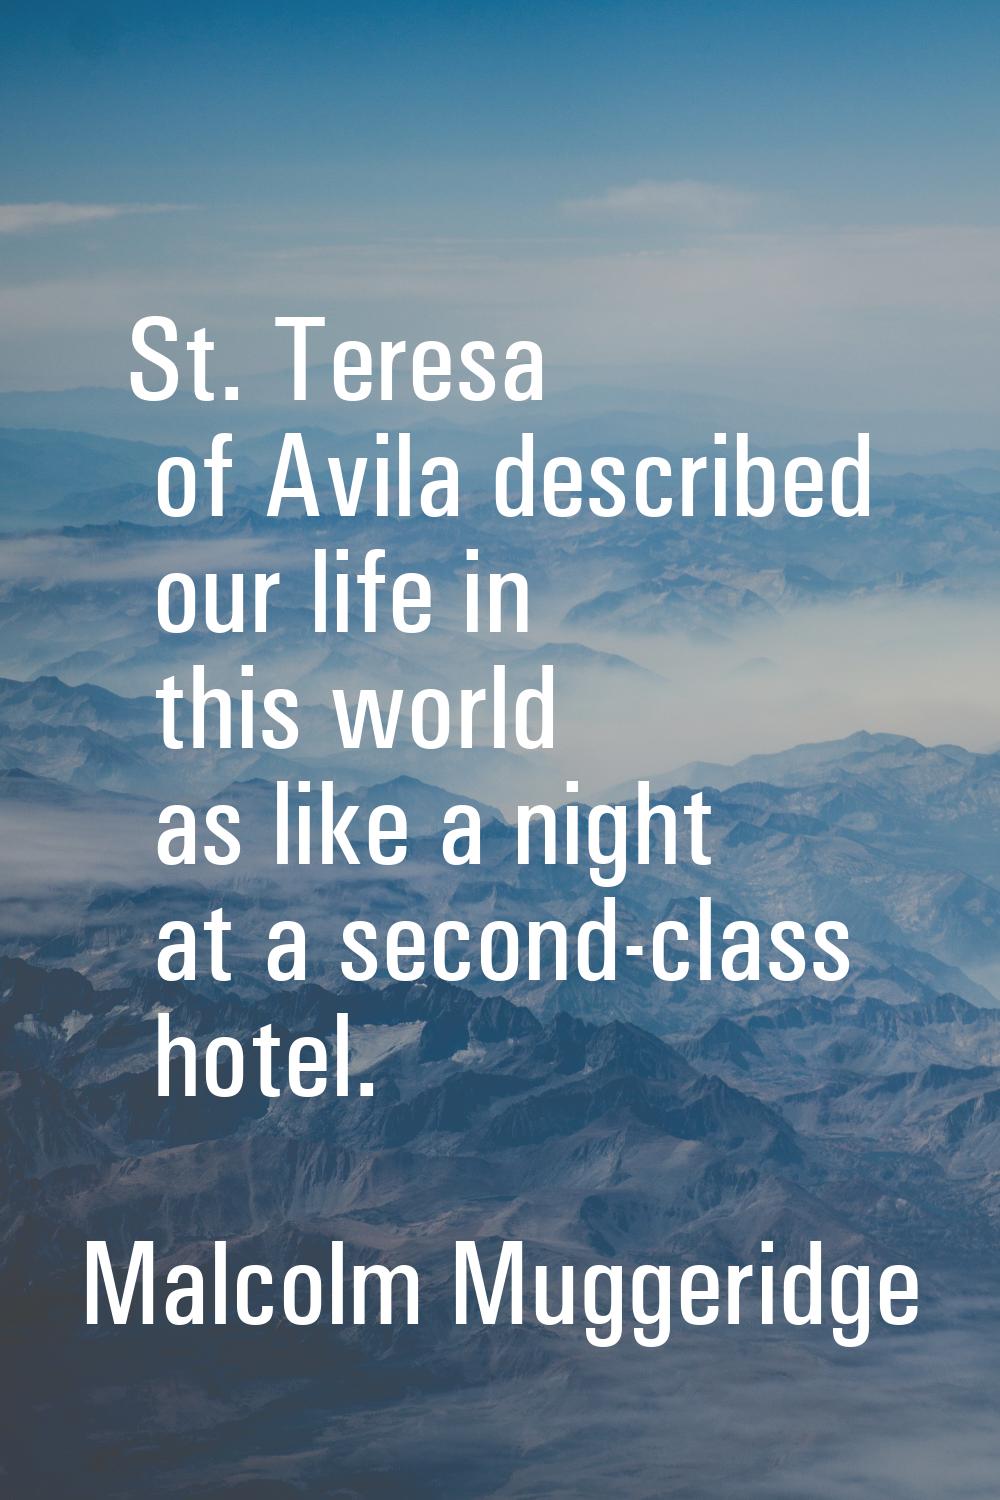 St. Teresa of Avila described our life in this world as like a night at a second-class hotel.